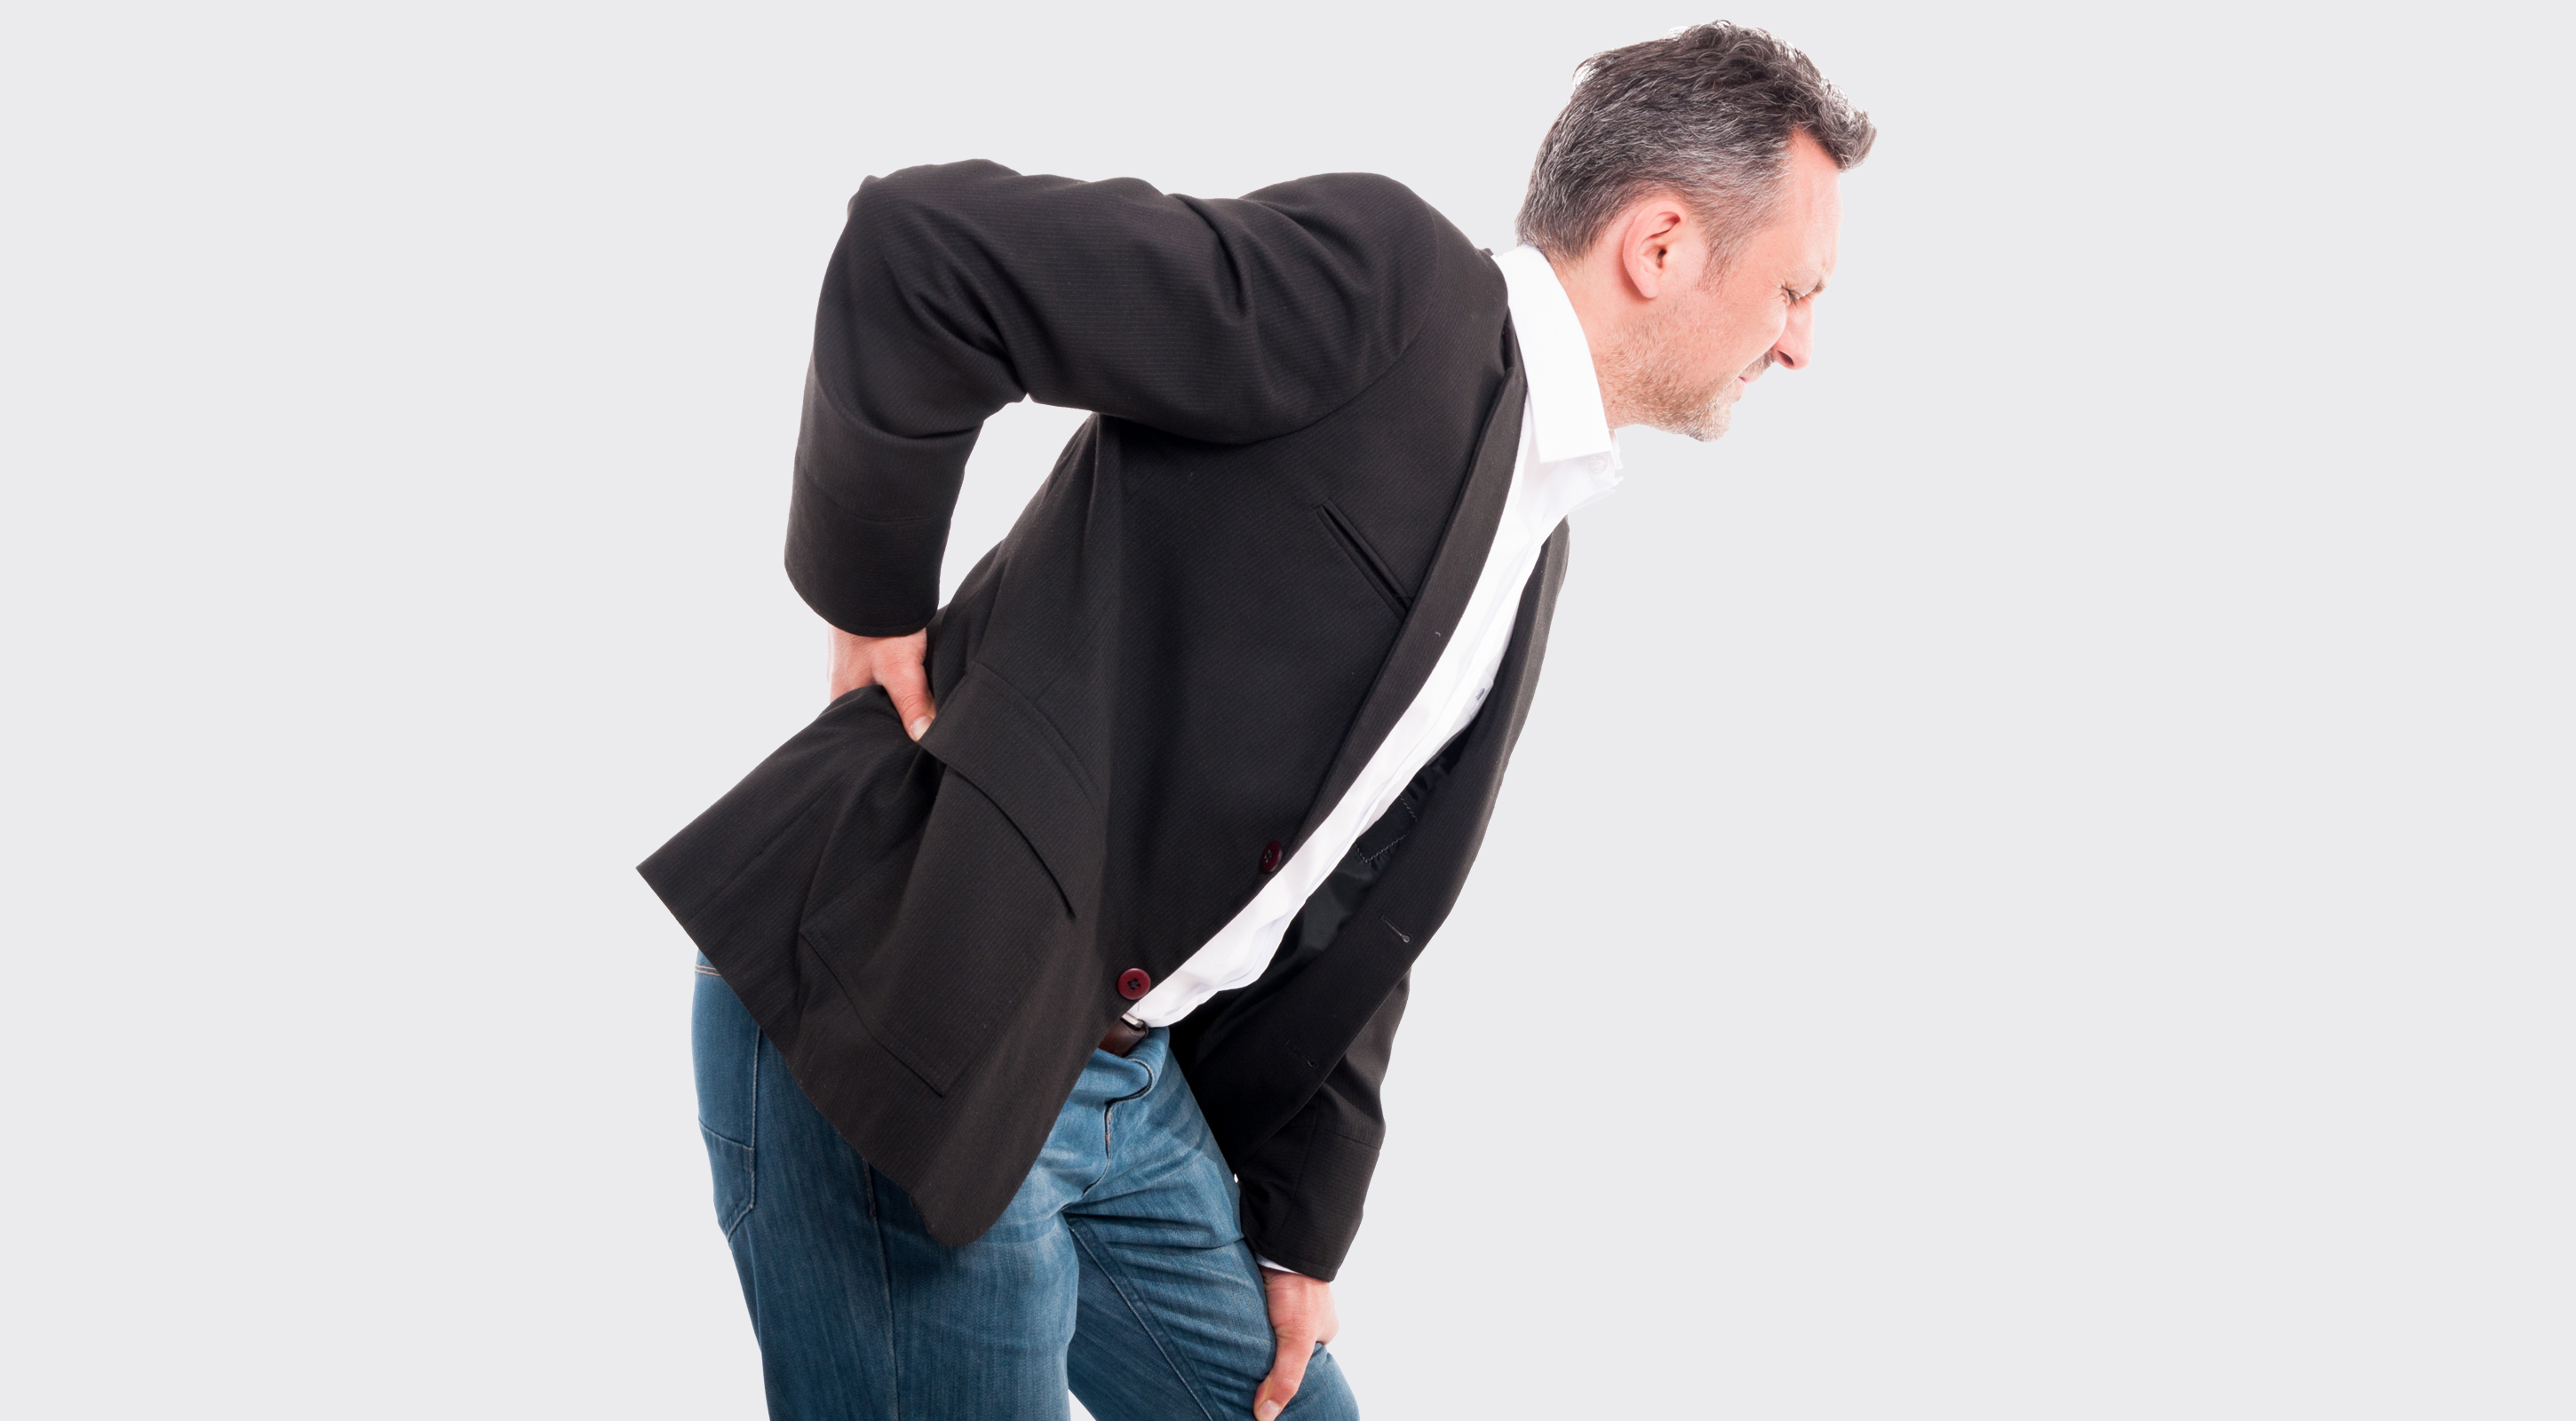 Tonawanda back pain controlled with chiropractic care 